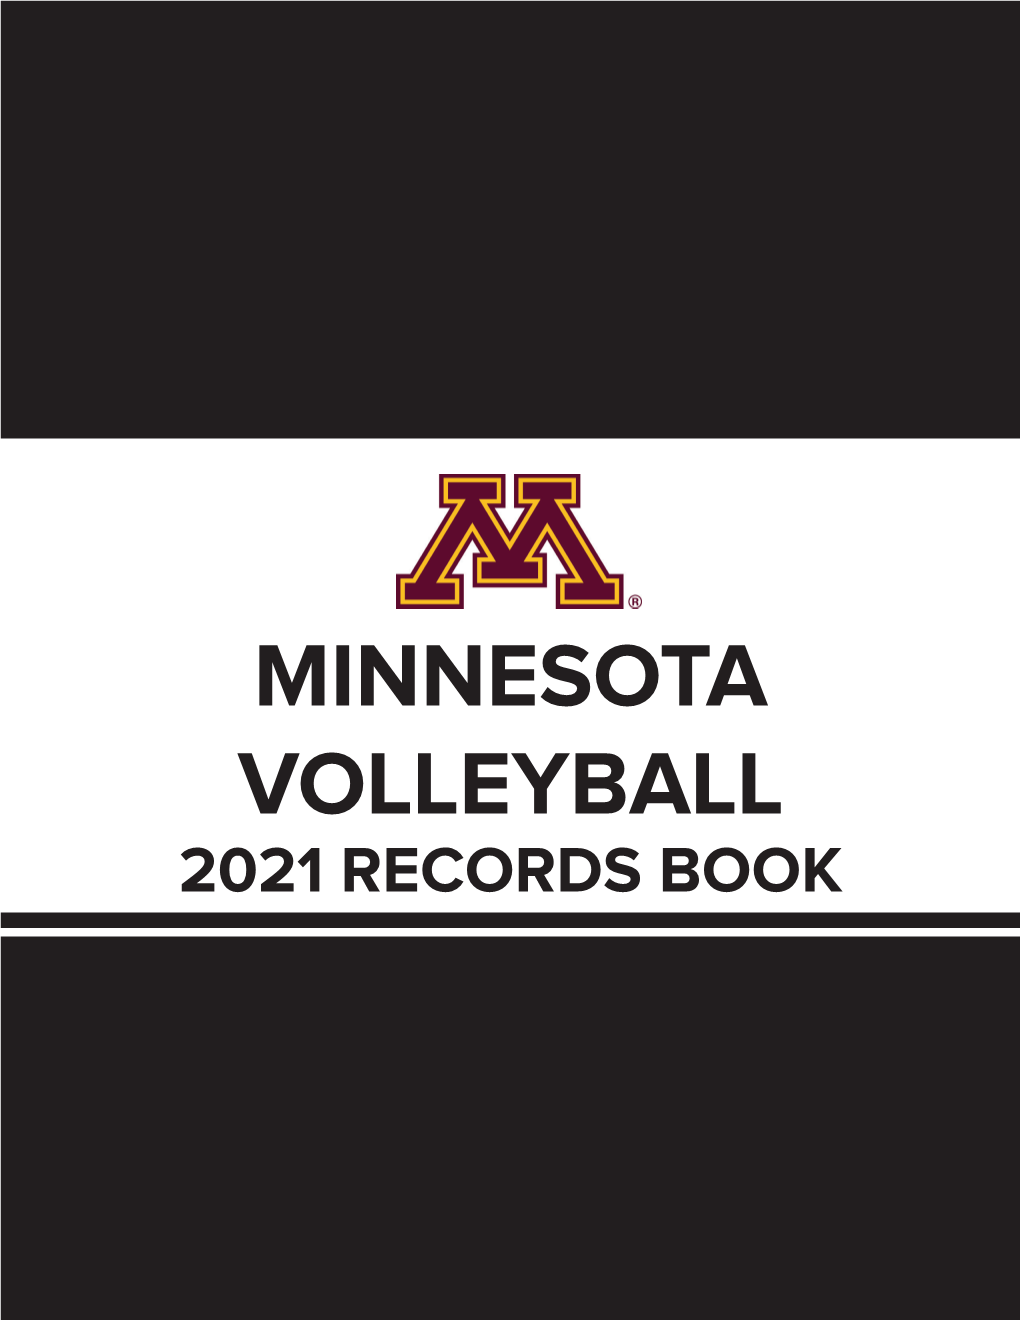 Minnesota Volleyball 2021 Records Book Career Records